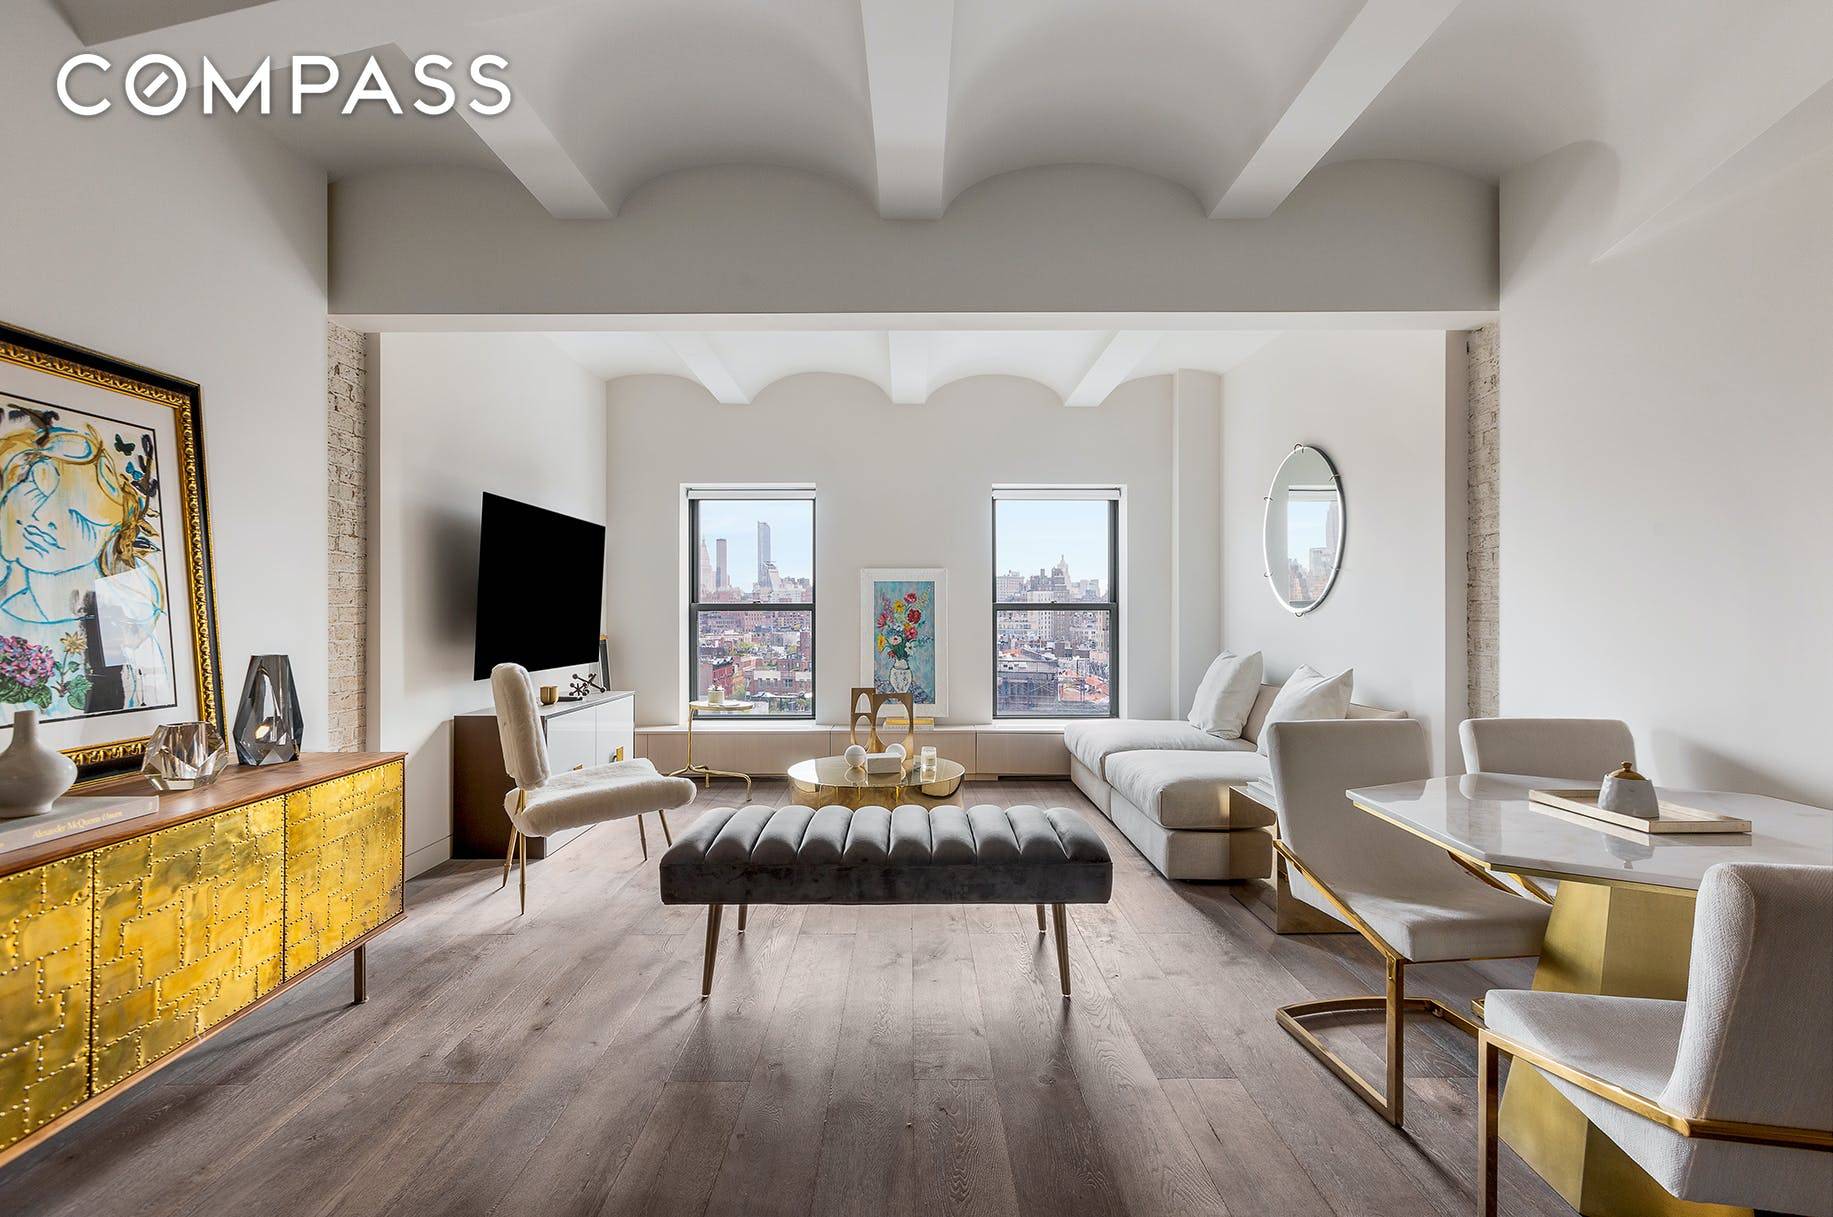 On a quiet tree lined street in West Village, in one of the finest residential buildings in Manhattan, you will find this spacious and exquisitely appointed studio.